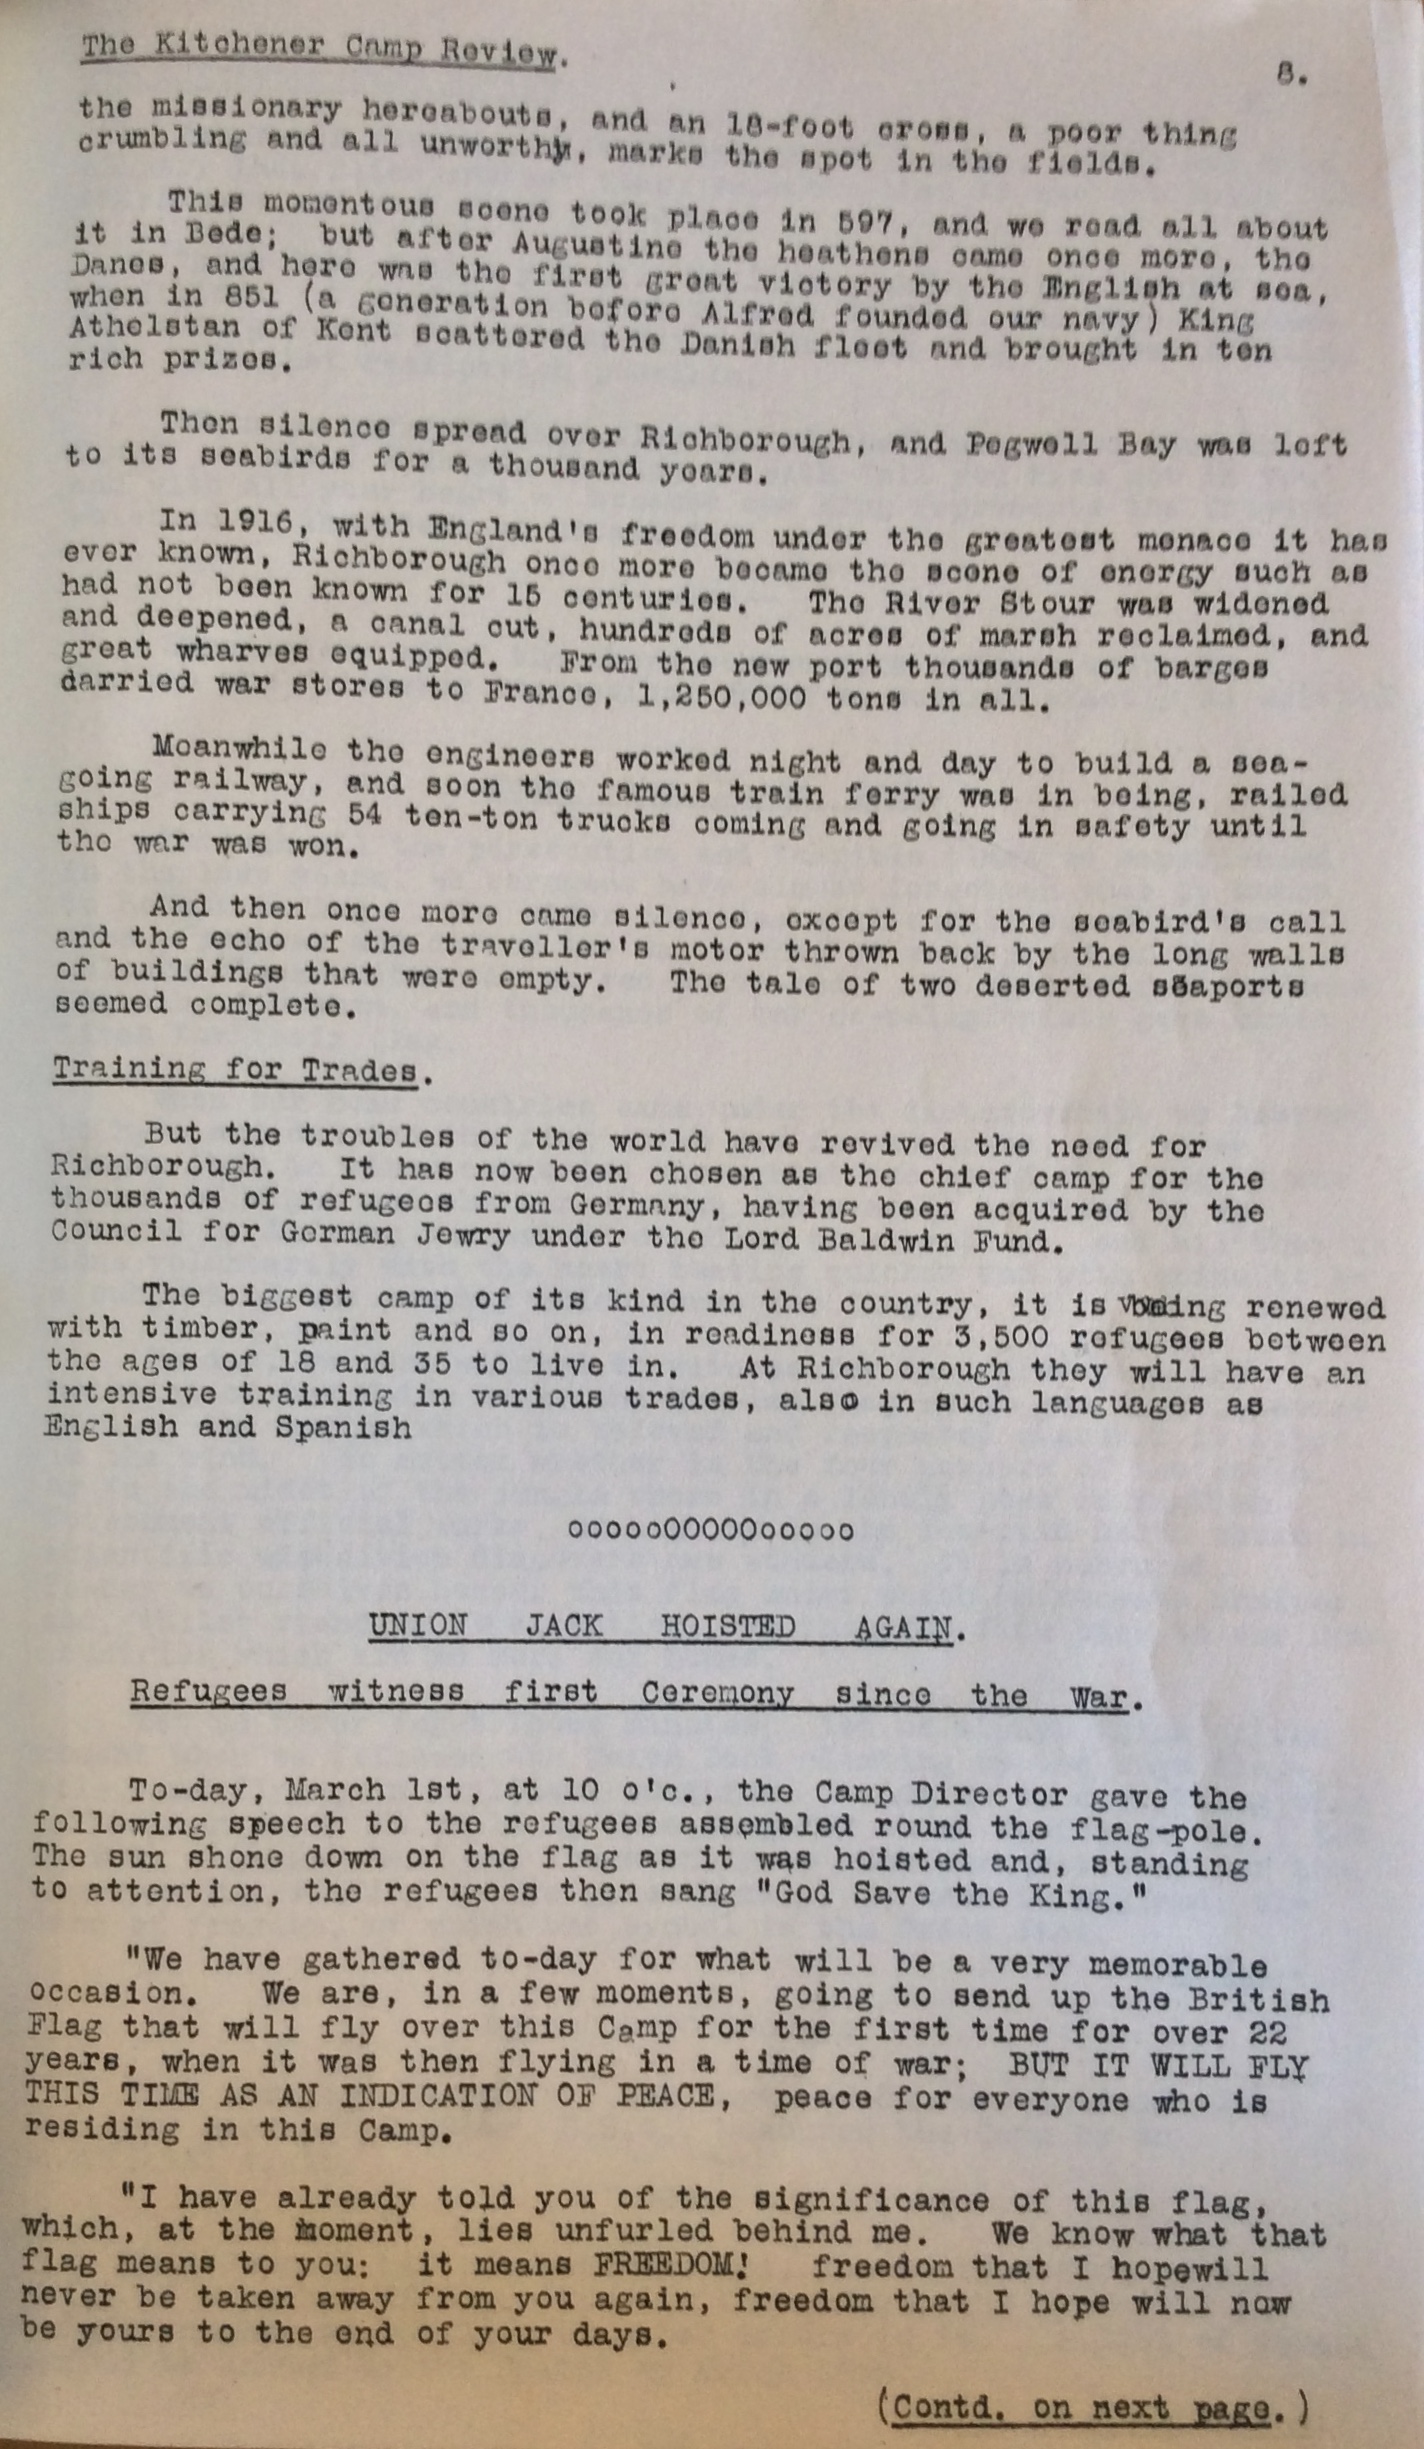 Kitchener Camp Review, No. 1, March 1939, page 8